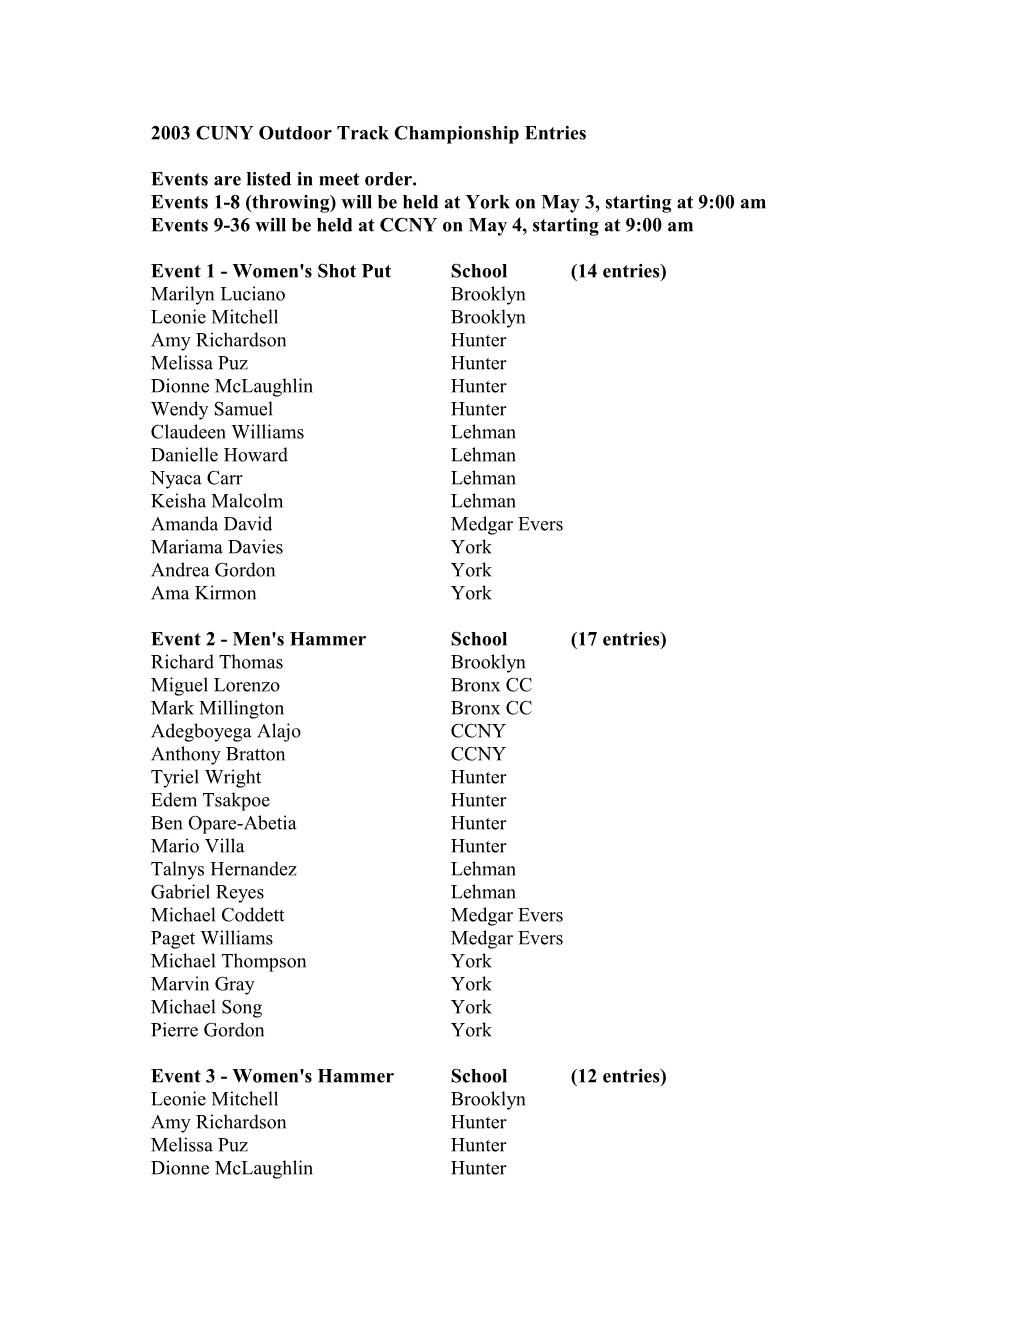 2003 Outdoor Track Entries